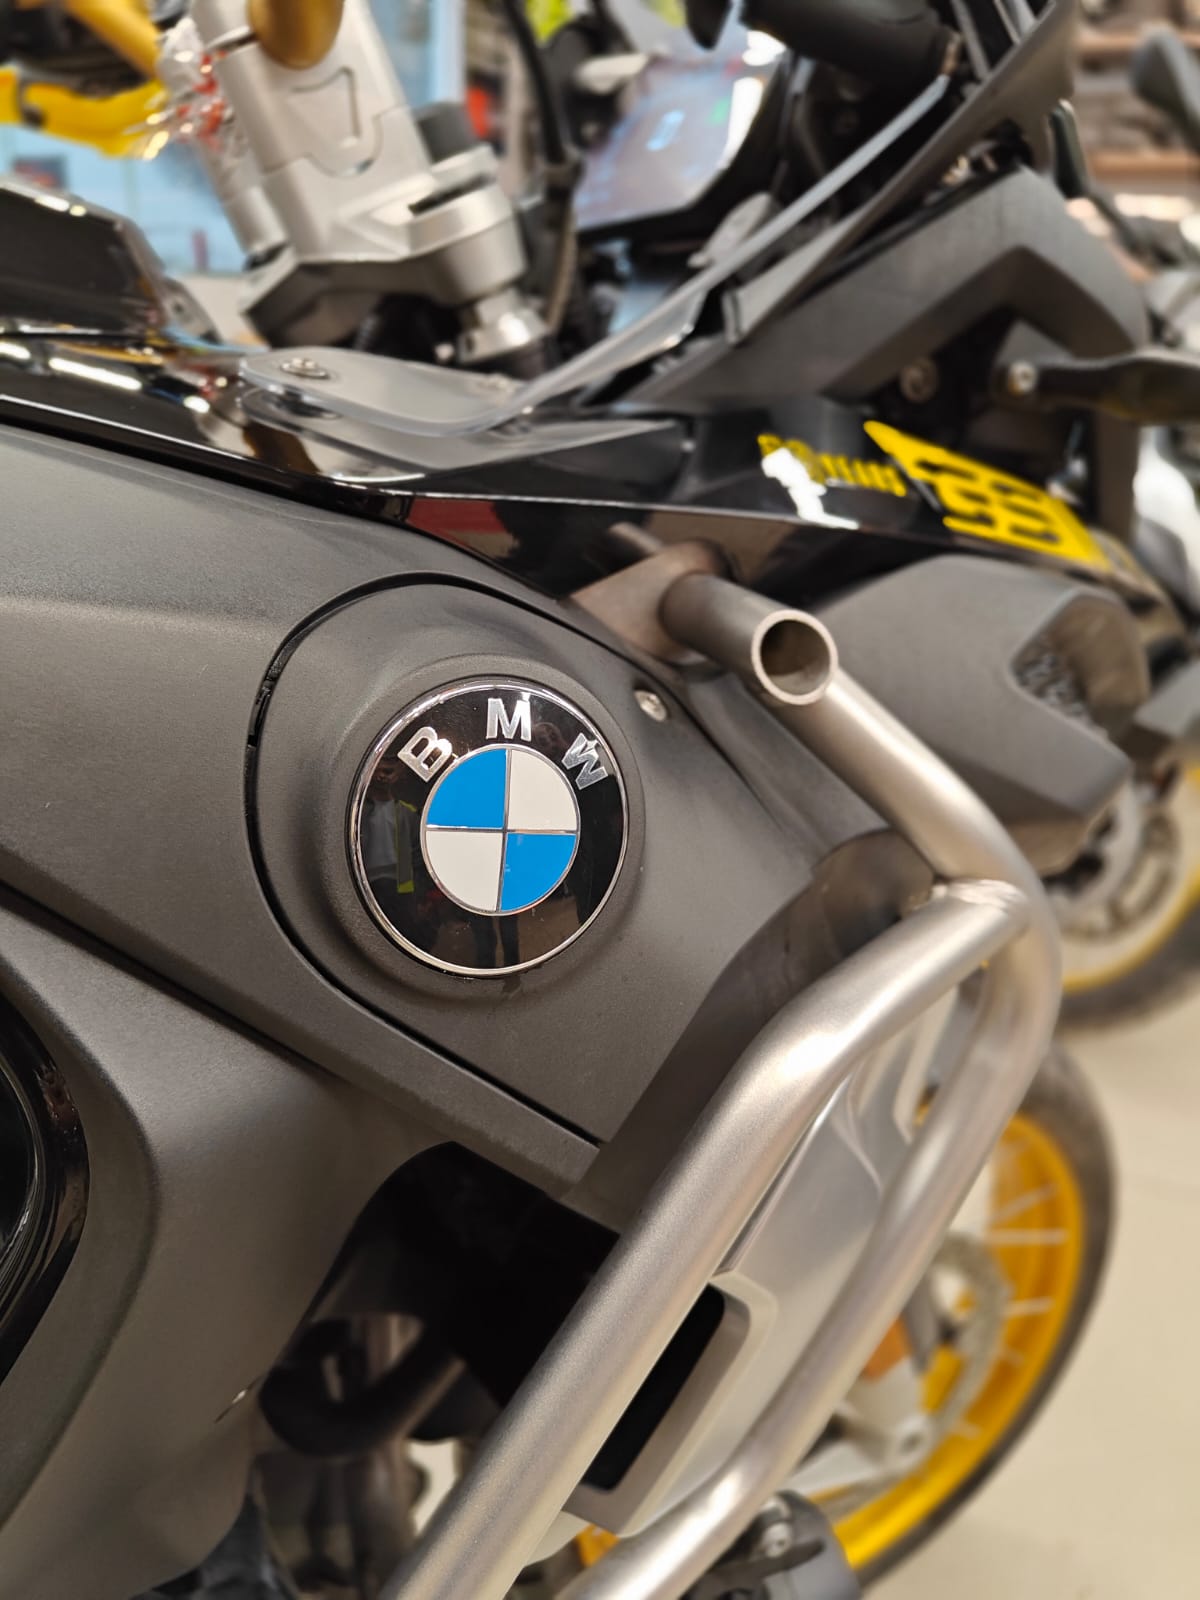 BMW R1250GSA 40th Anniversary Edition UP Registered For Sale Pathpavers Garage